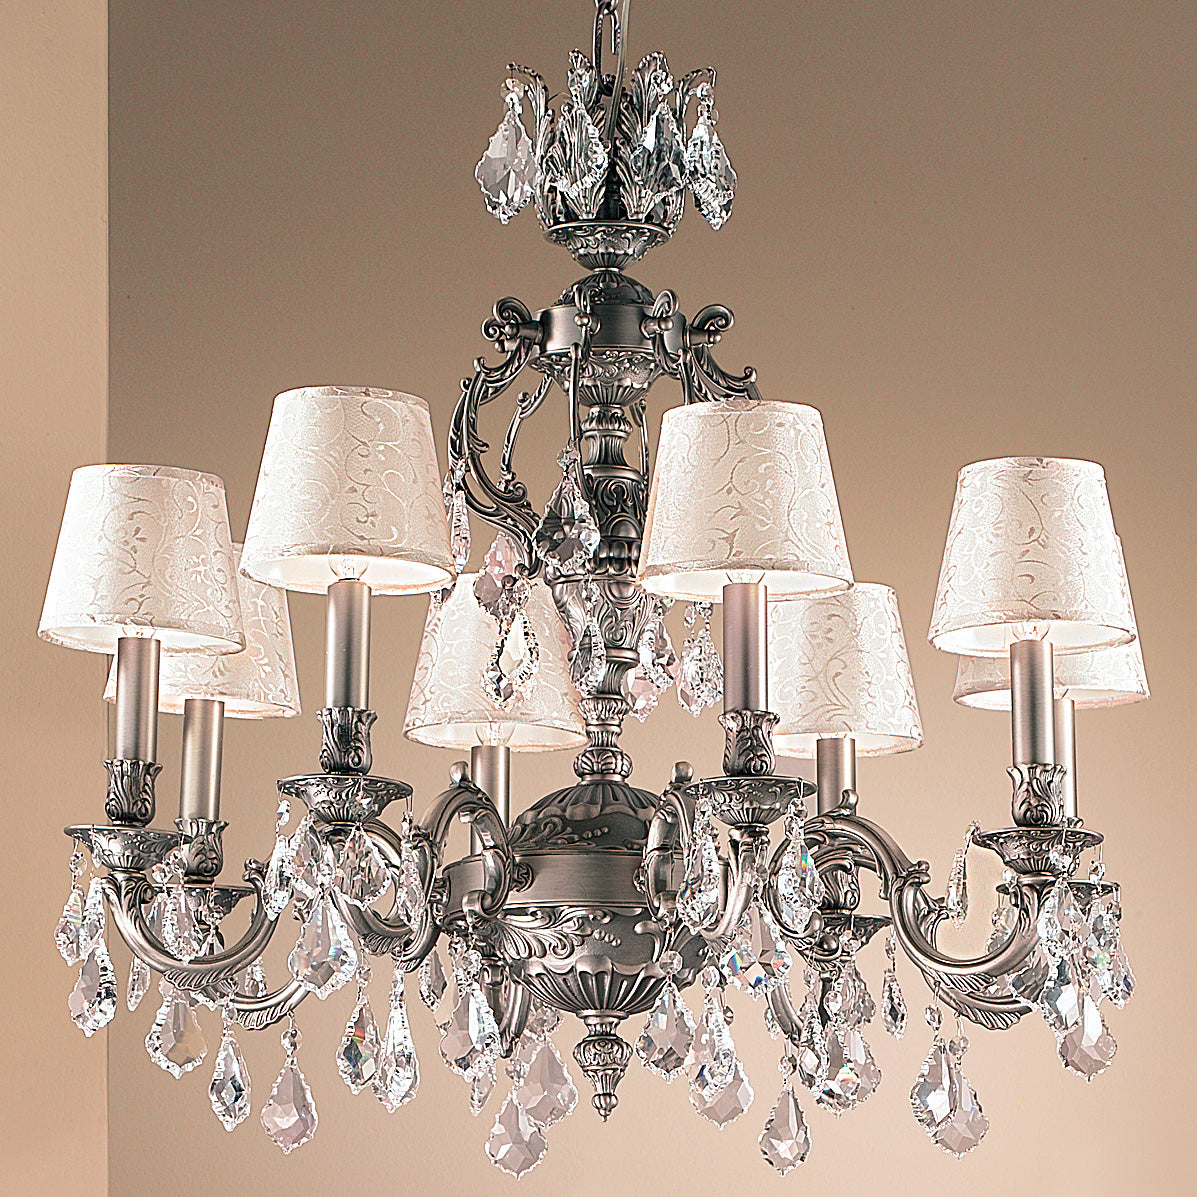 Classic Lighting 57378 FG S Chateau Crystal Chandelier in French Gold (Imported from Spain)